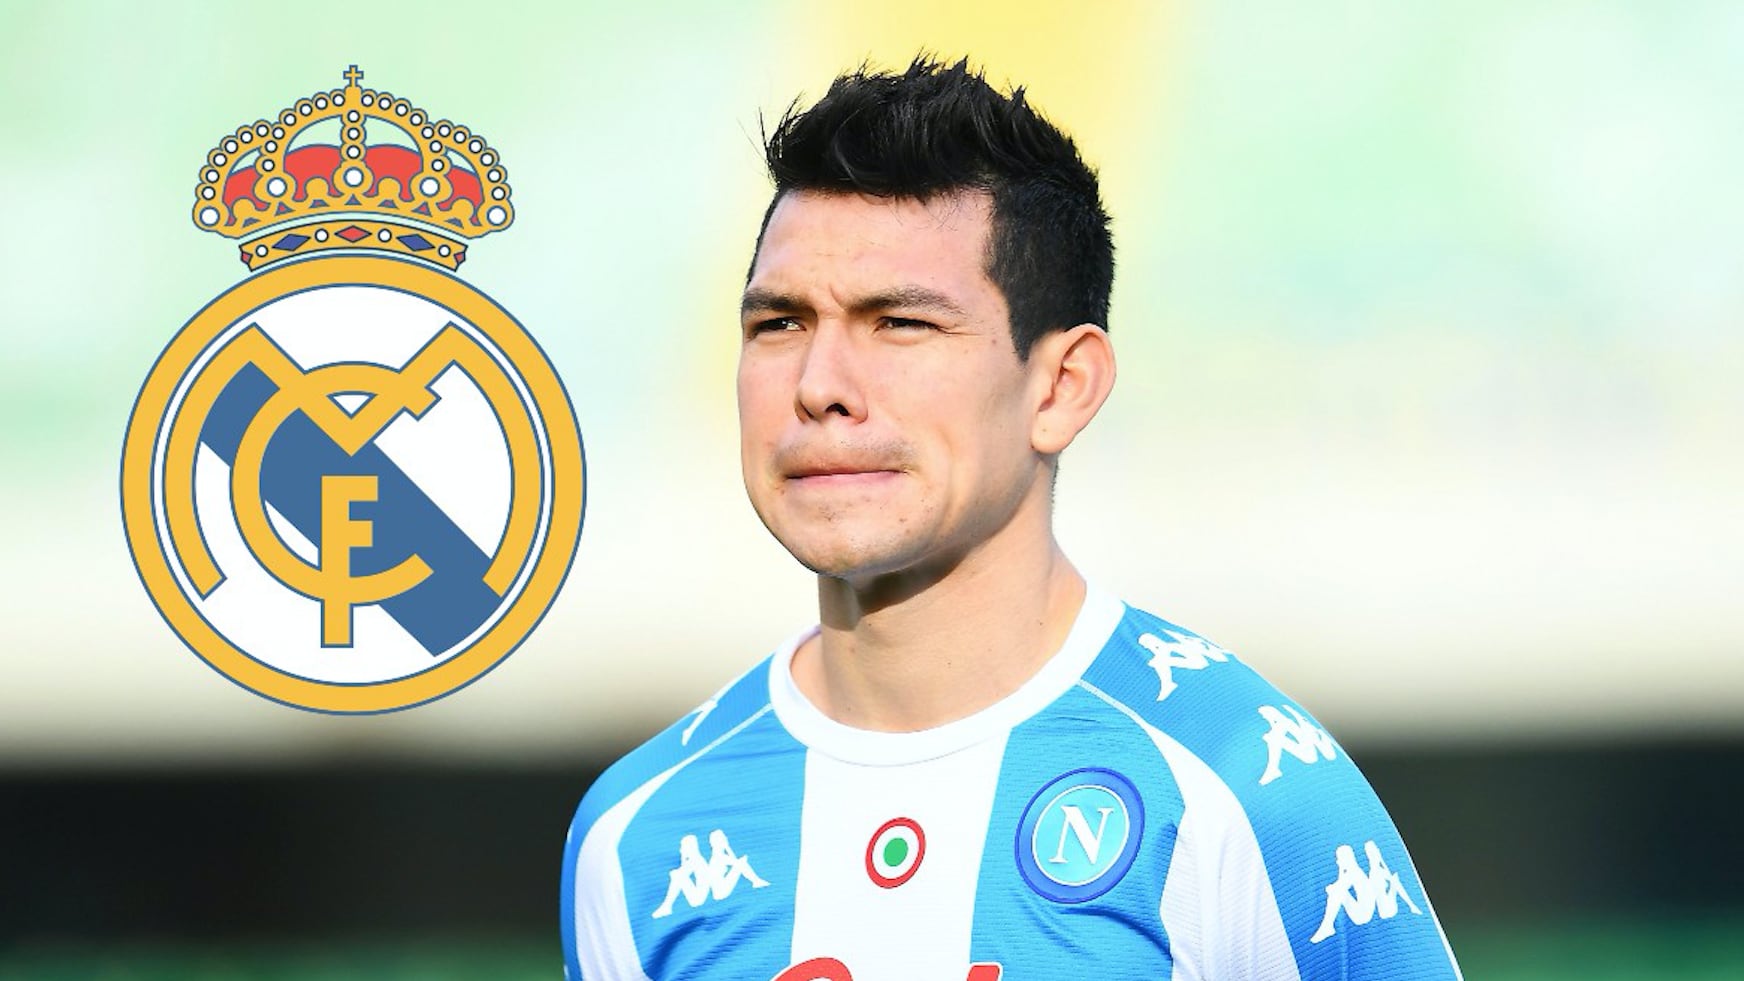 Hirving Lozano | Getty Images